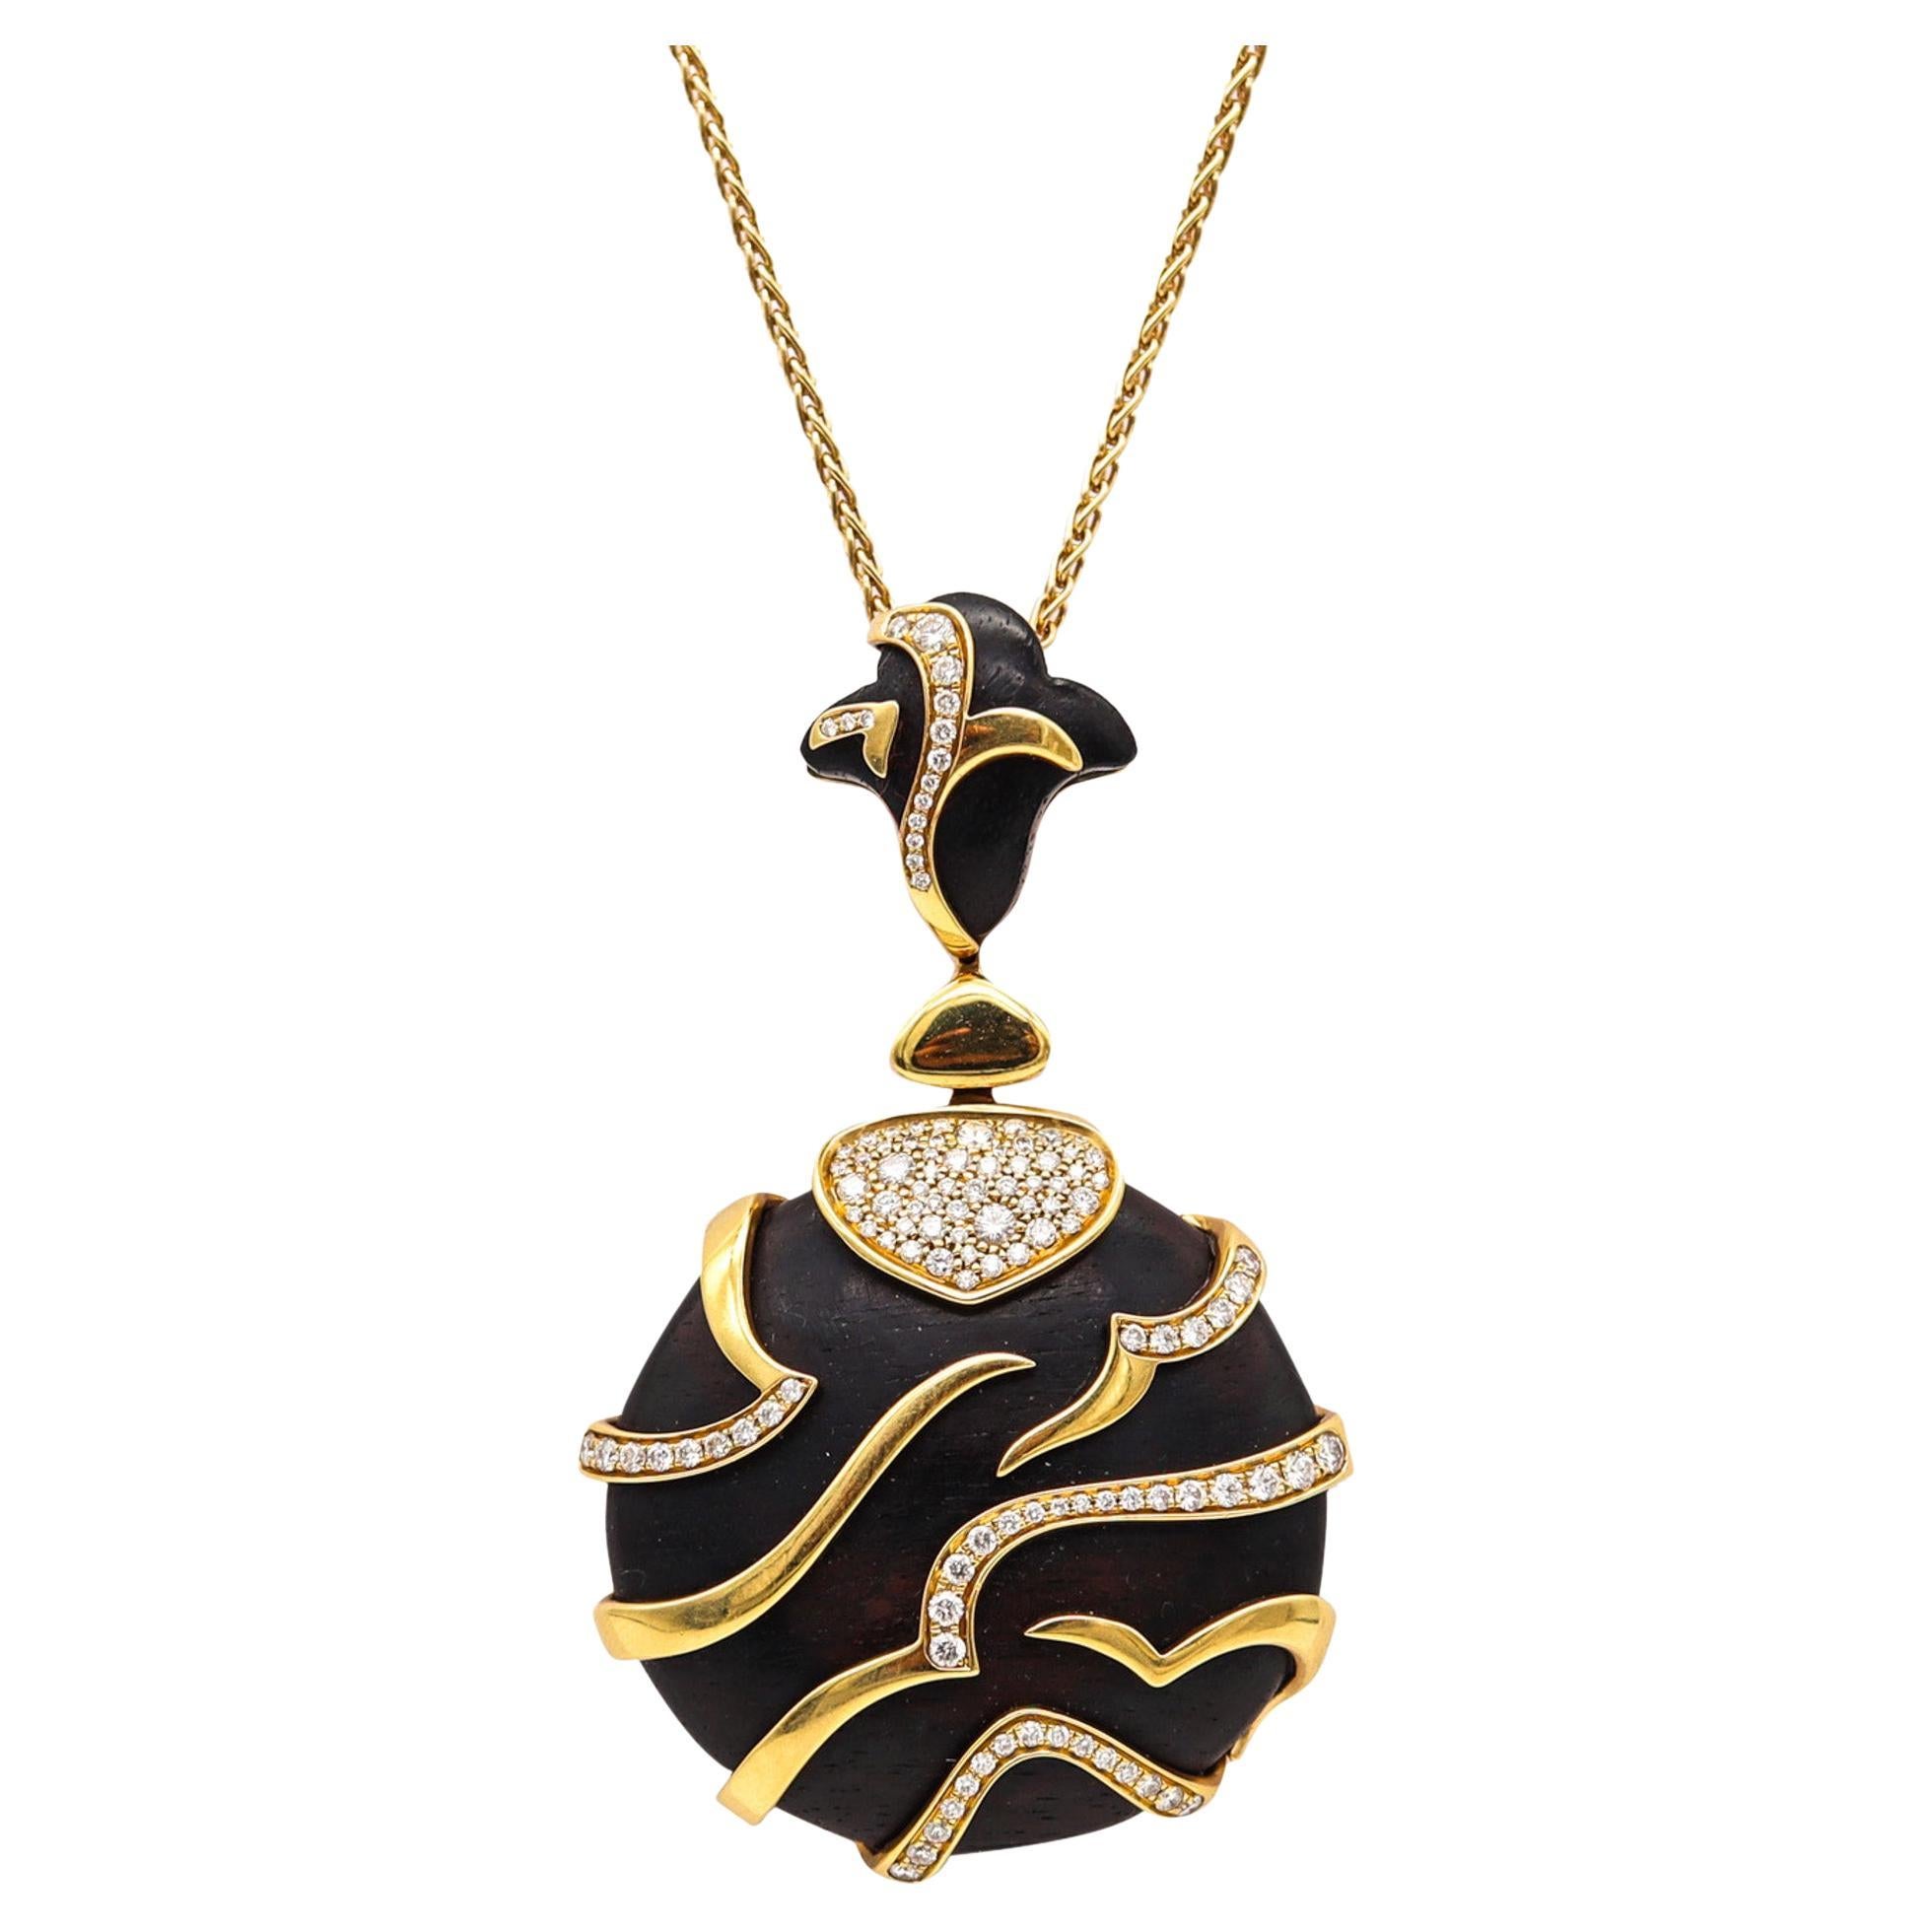 Marina B. Milan Long Necklace in Wood in 18Kt Yellow Gold and 1.54 Ctw Diamonds For Sale